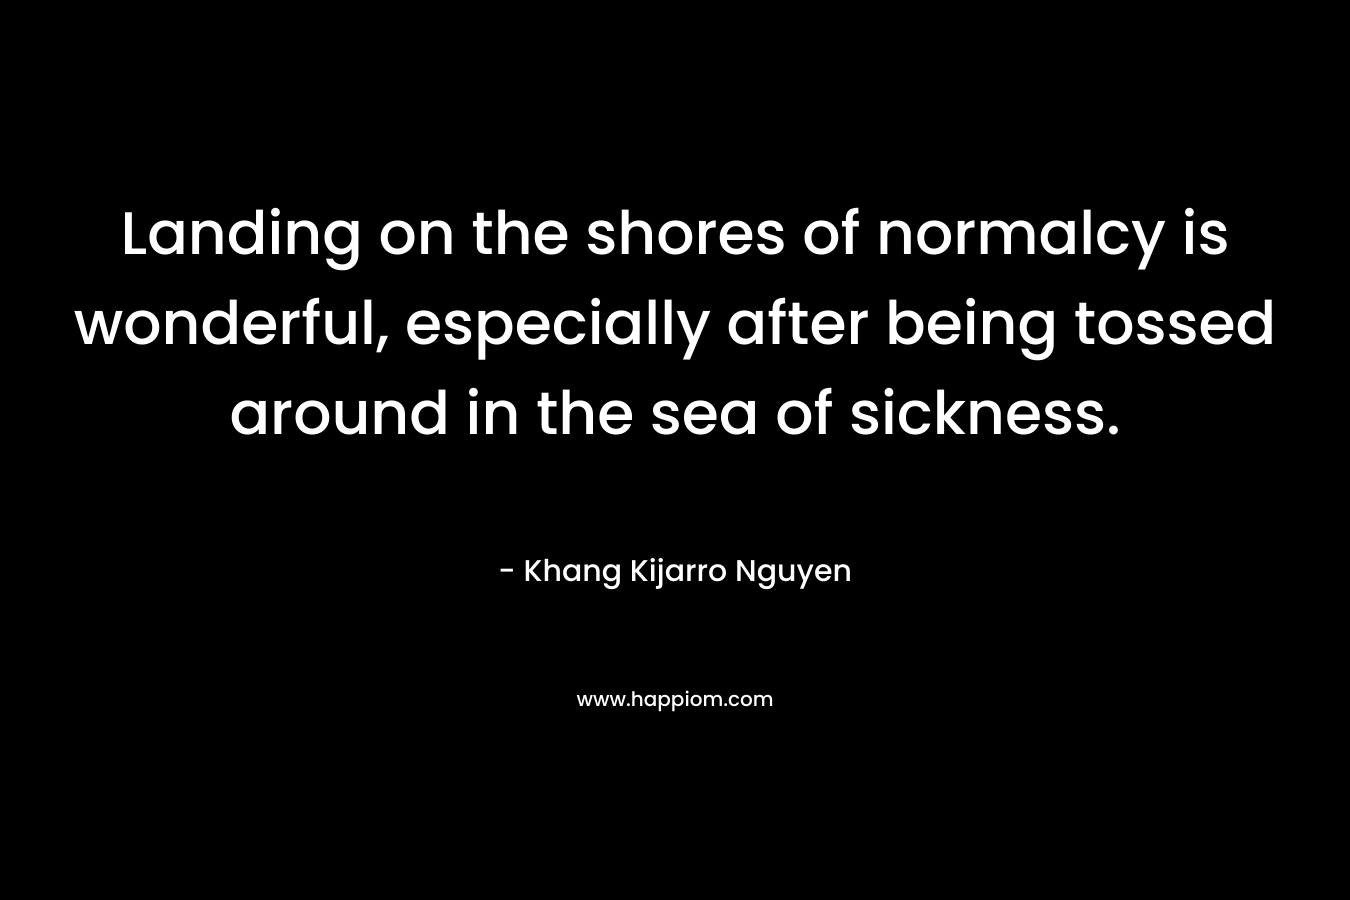 Landing on the shores of normalcy is wonderful, especially after being tossed around in the sea of sickness. – Khang Kijarro Nguyen